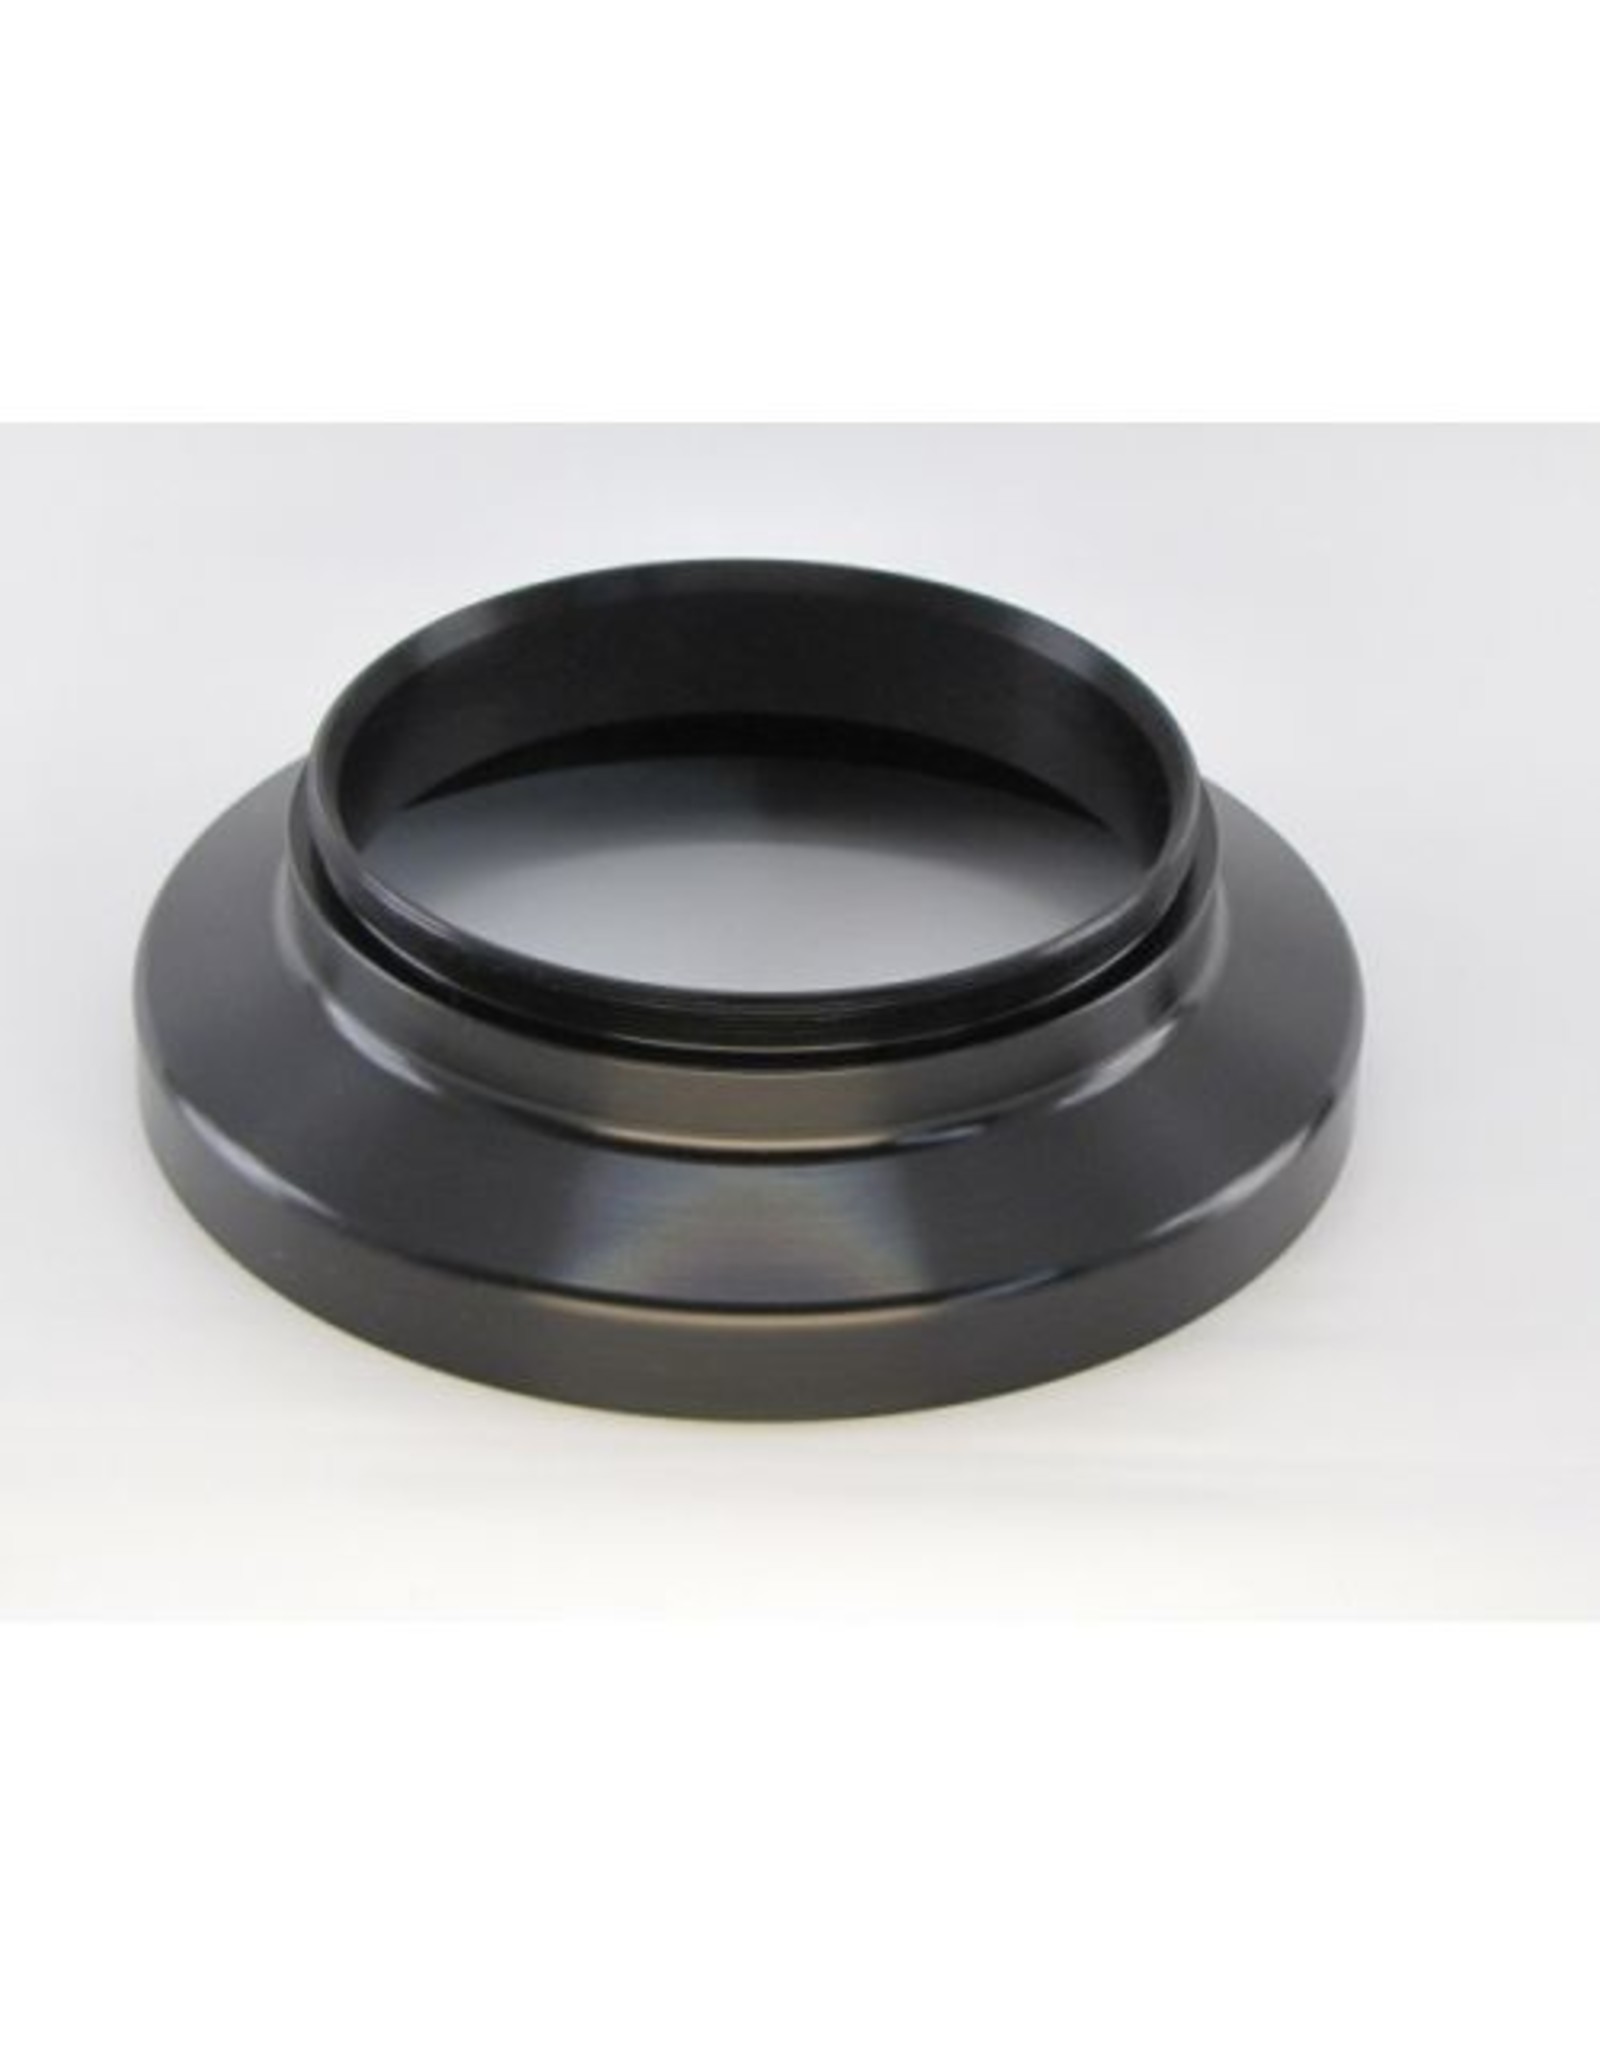 Takahashi Feathertouch A35-503-TOA150---Feather Touch Adapter 3.5" for Takahashi TOA 150 telescopes